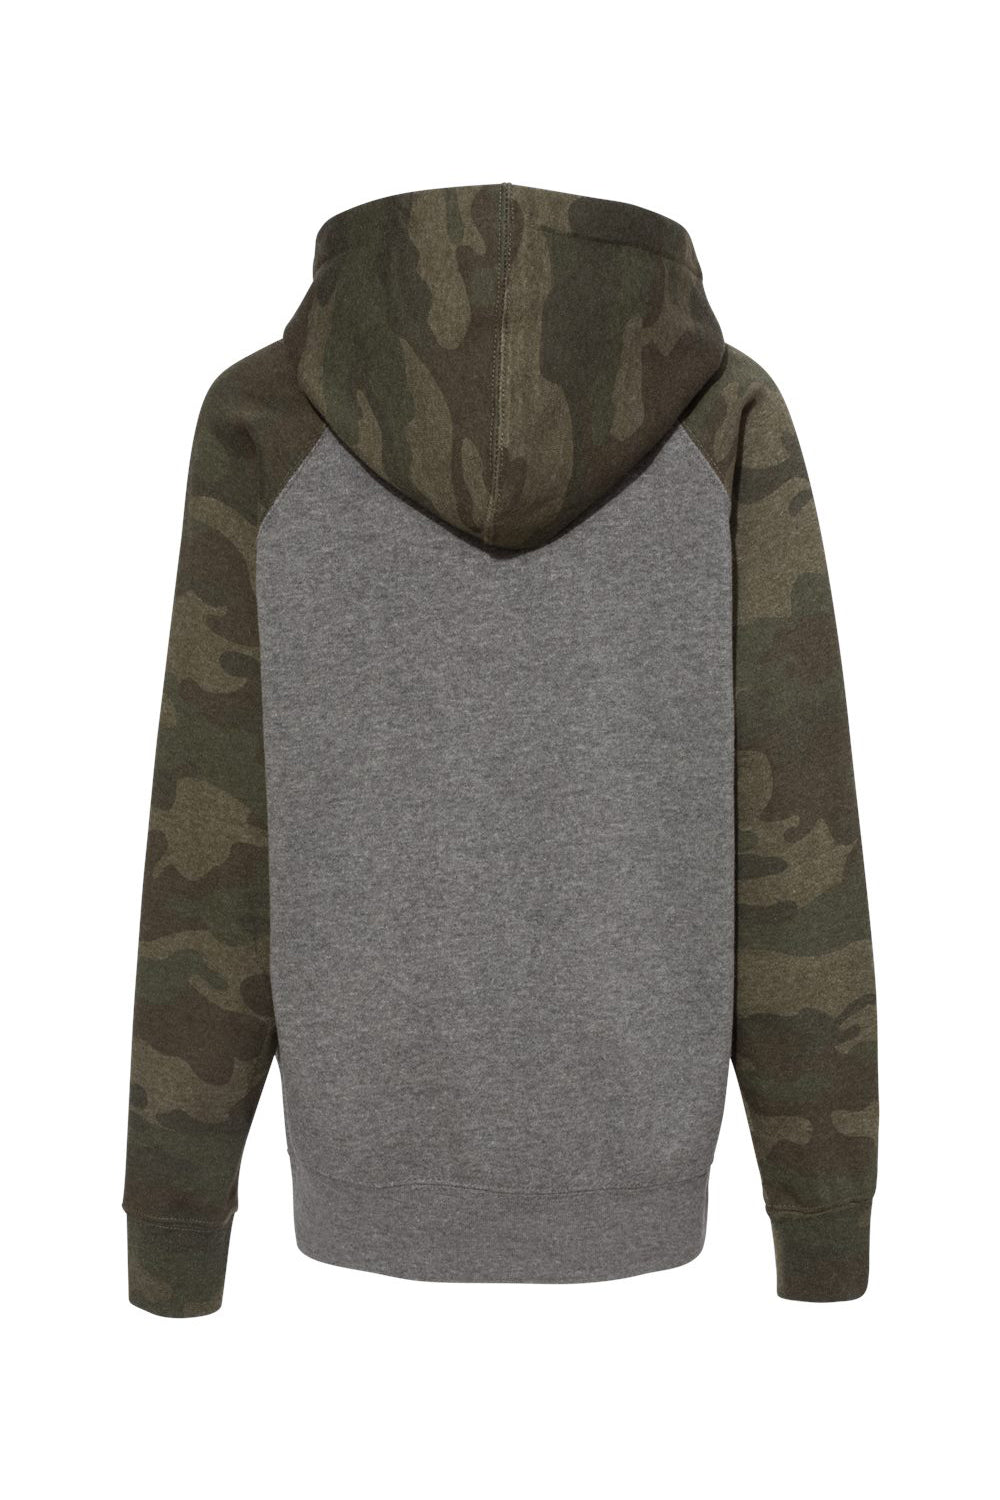 Independent Trading Co. PRM15YSB Youth Special Blend Raglan Hooded Sweatshirt Hoodie Heather Nickel Grey/Forest Green Camo Flat Back